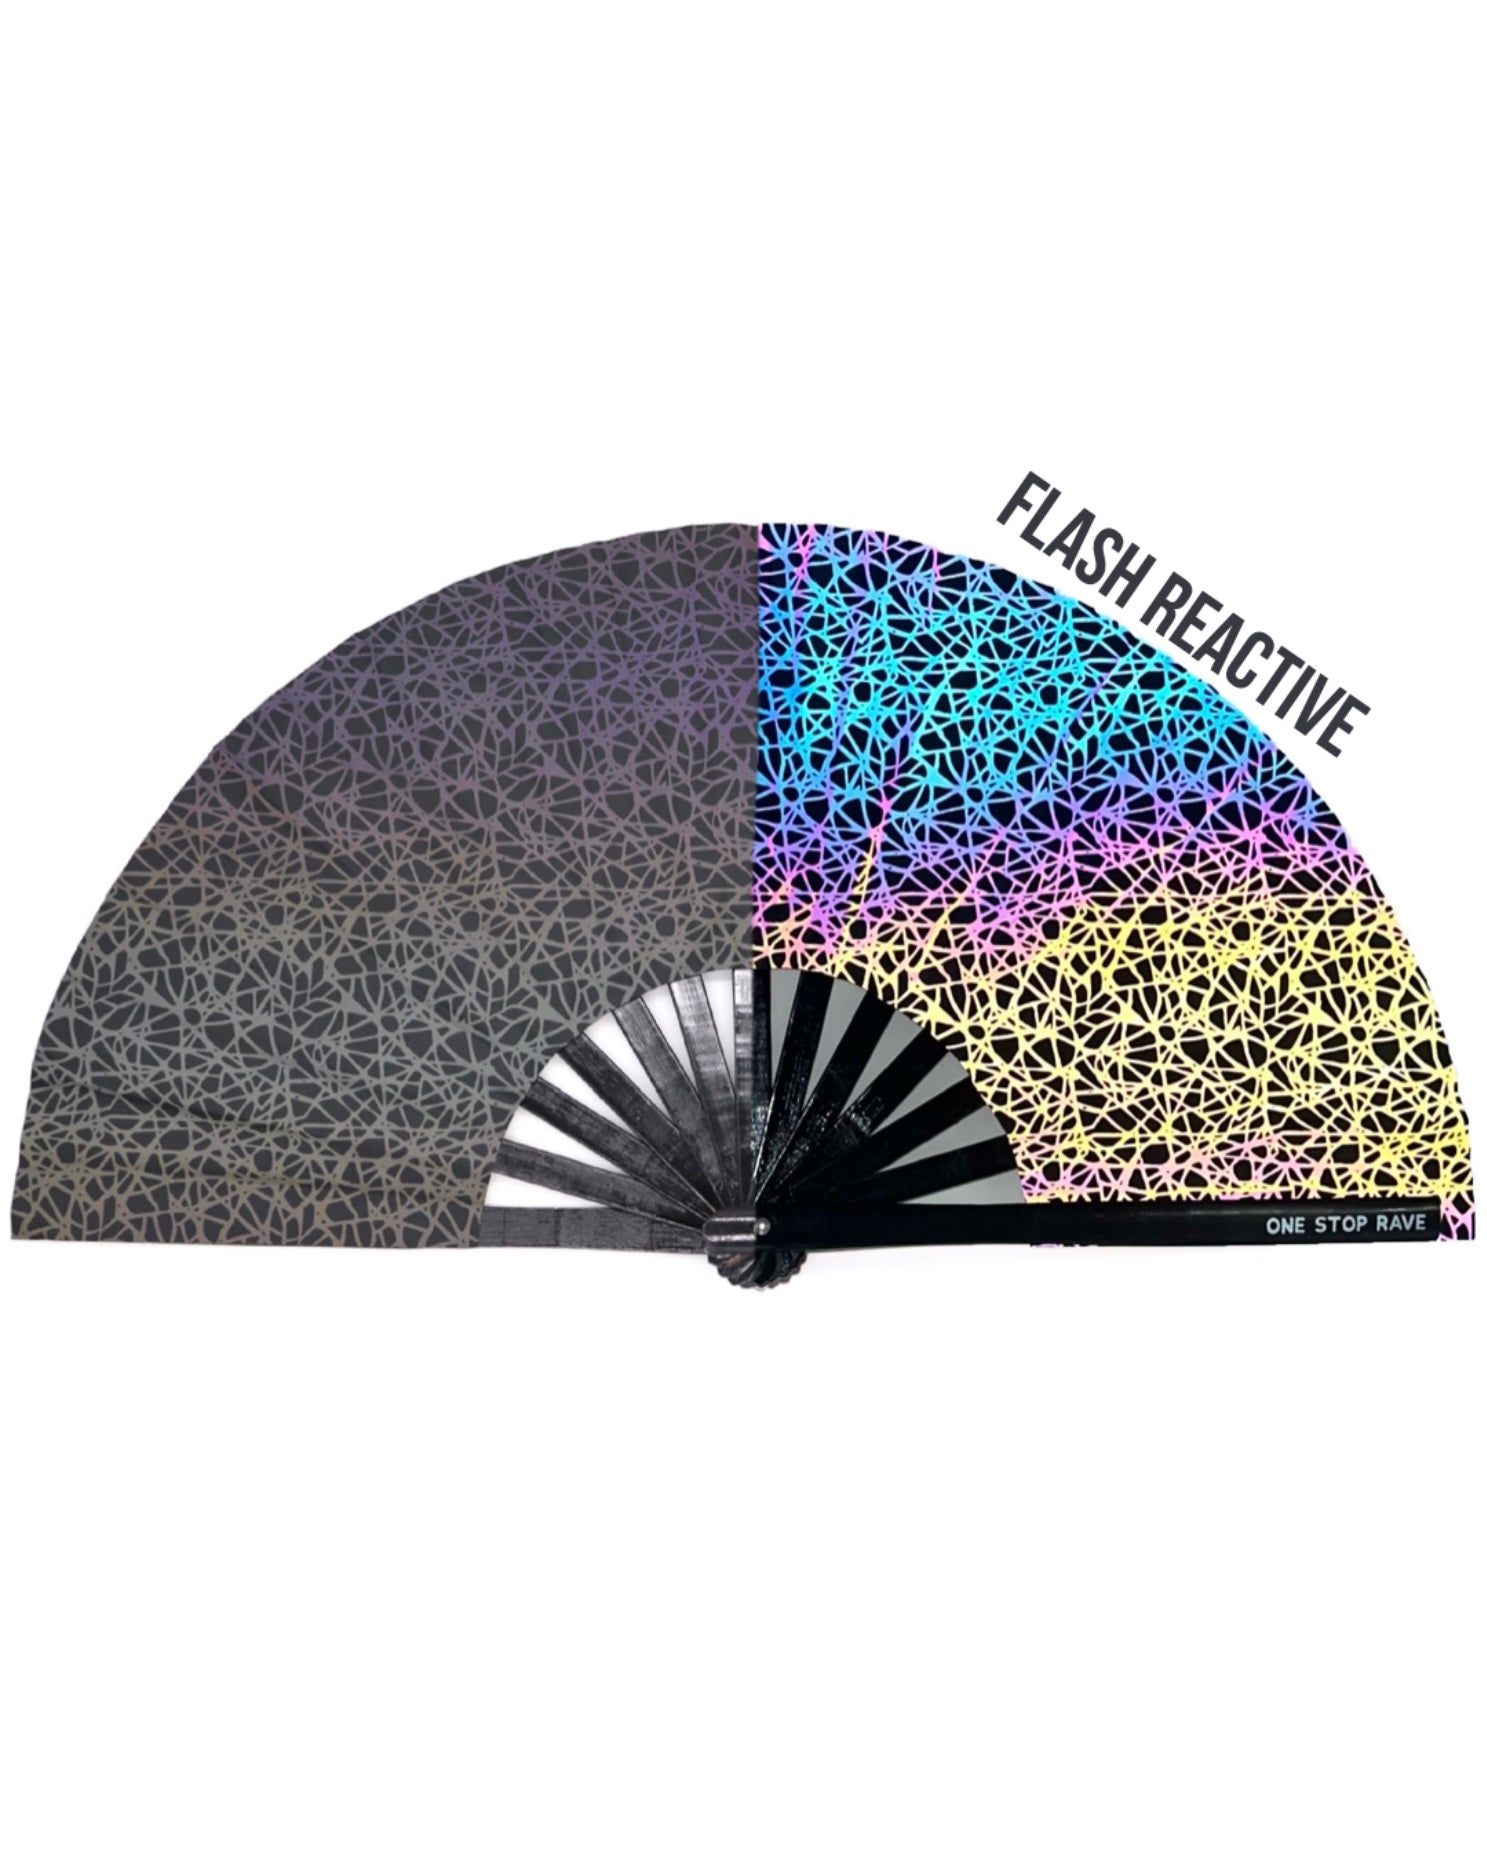 String Theory Reflective Hand Fan, Festival Fans 13.5", - One Stop Rave